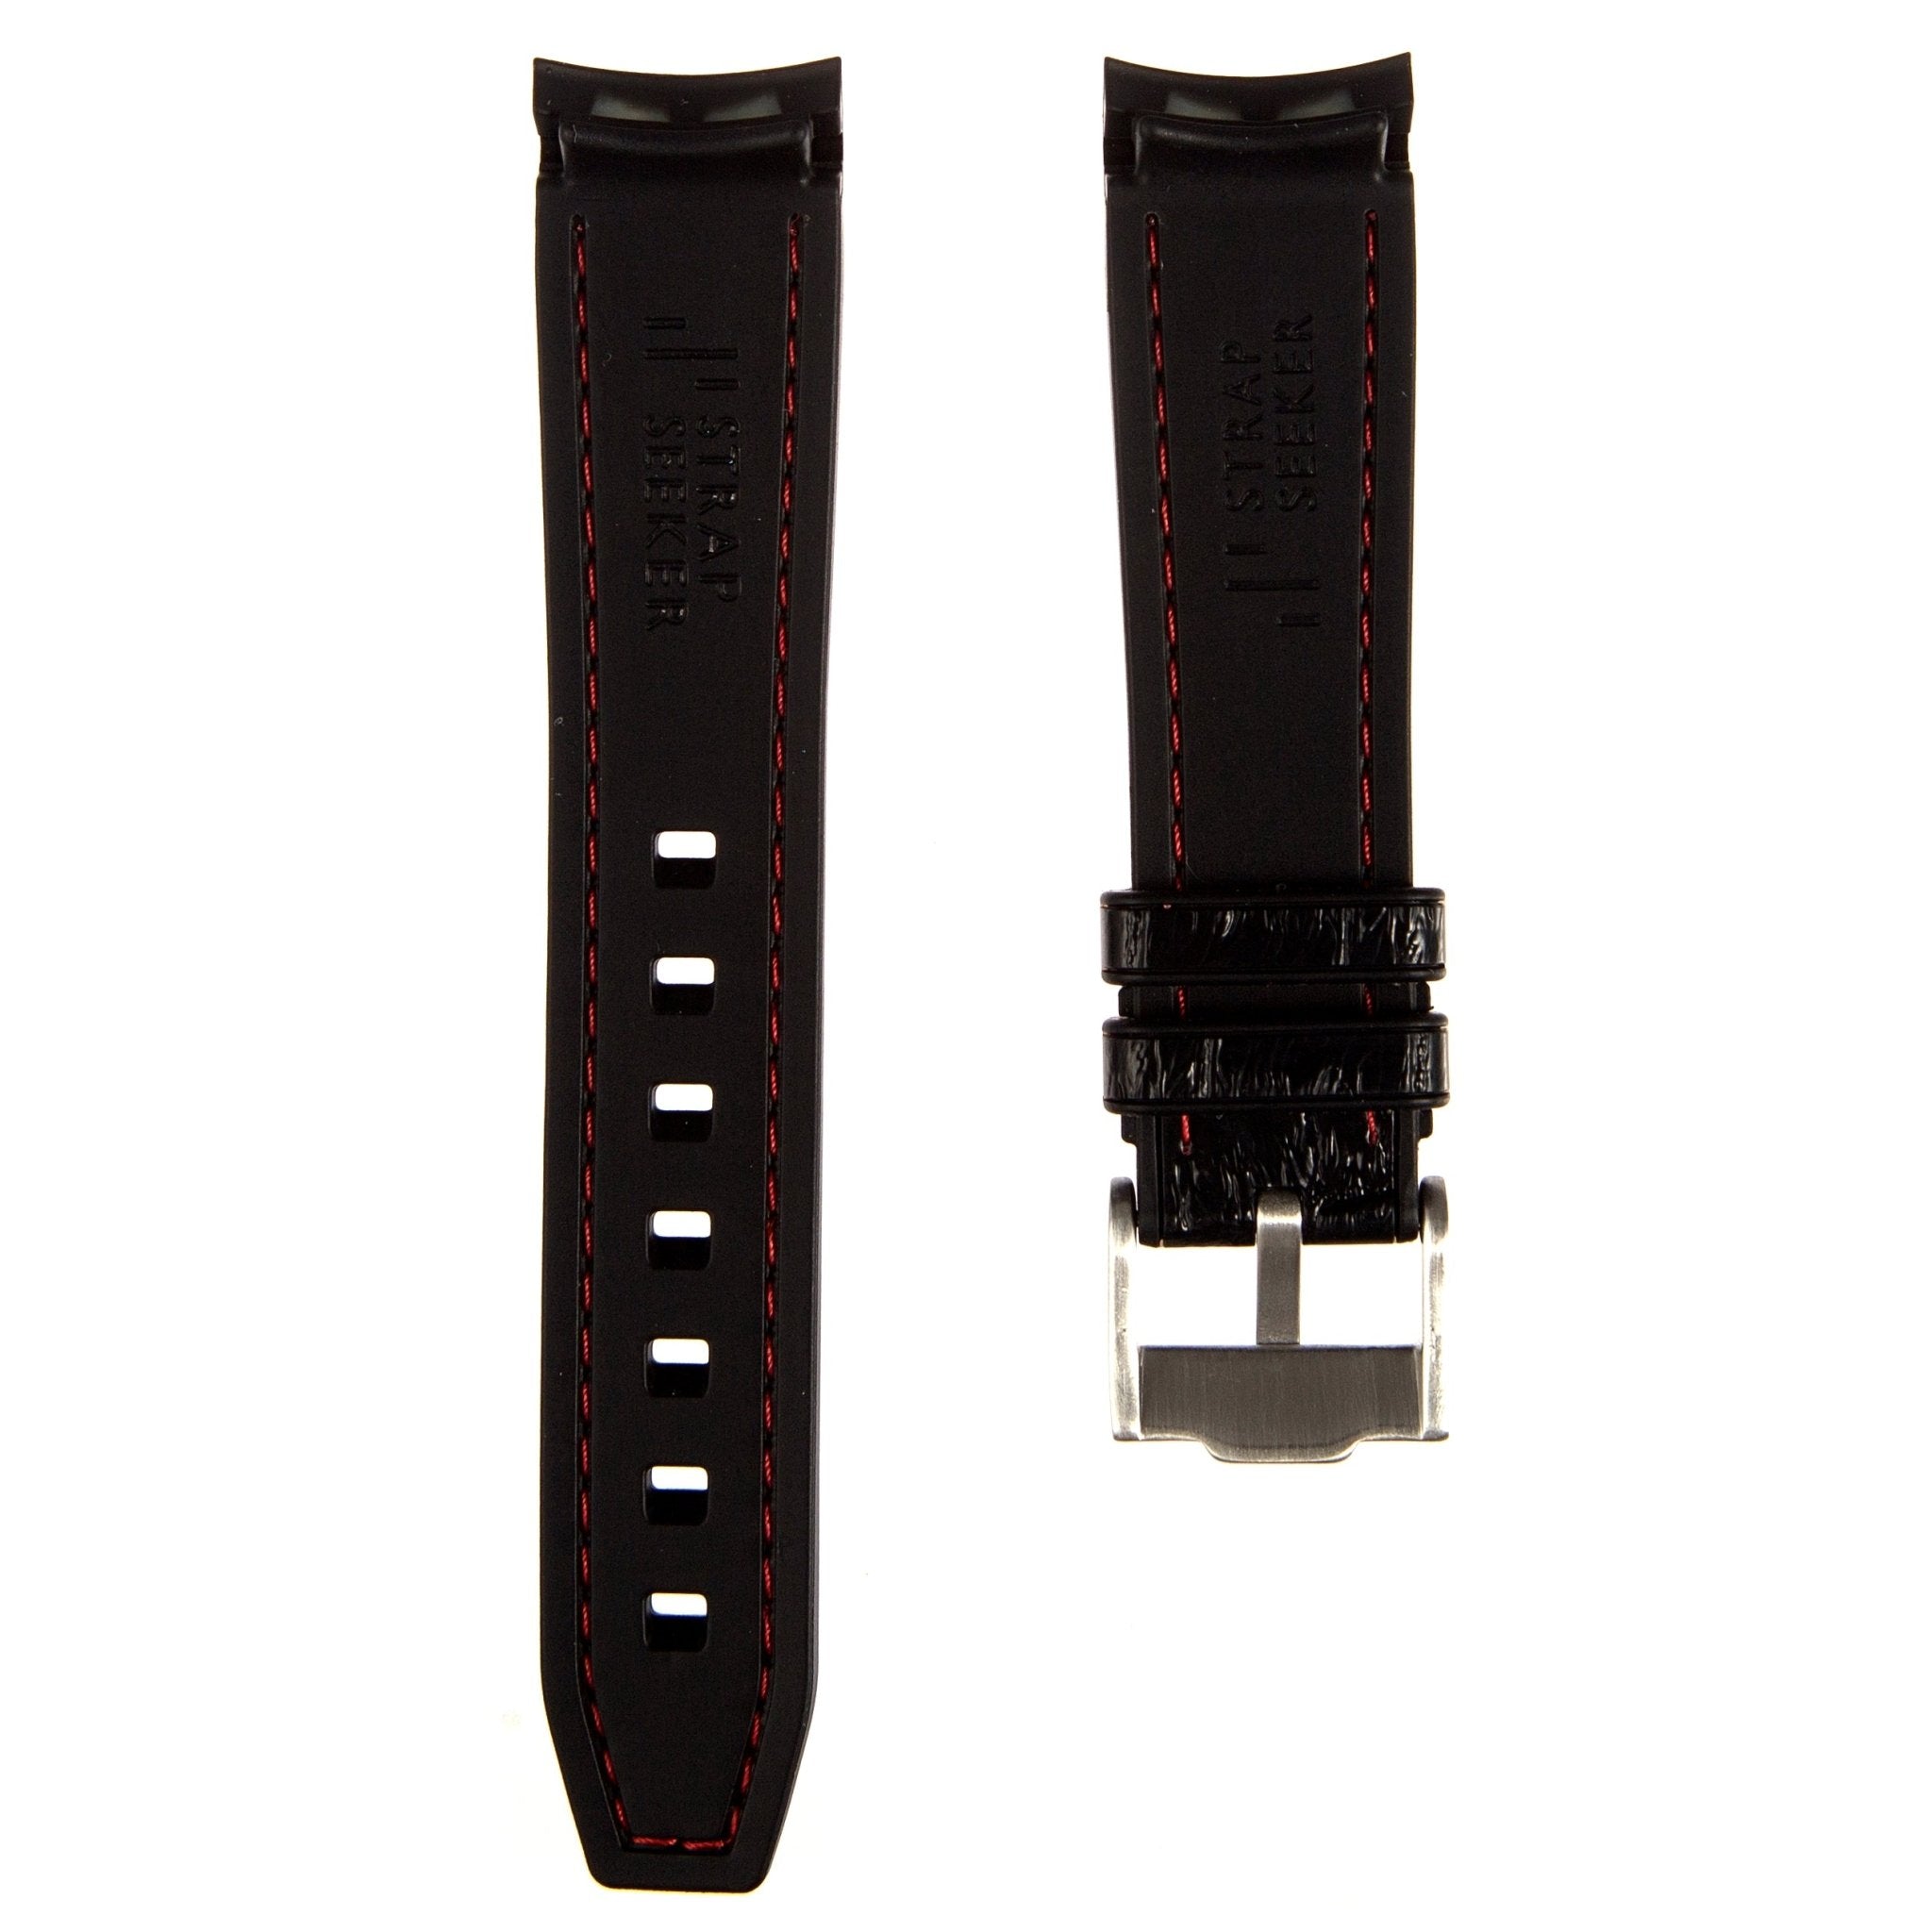 Alligator Embossed Curved End Premium Silicone Strap - Compatible with Omega Moonwatch - Black with Red Stitch (2406) -StrapSeeker